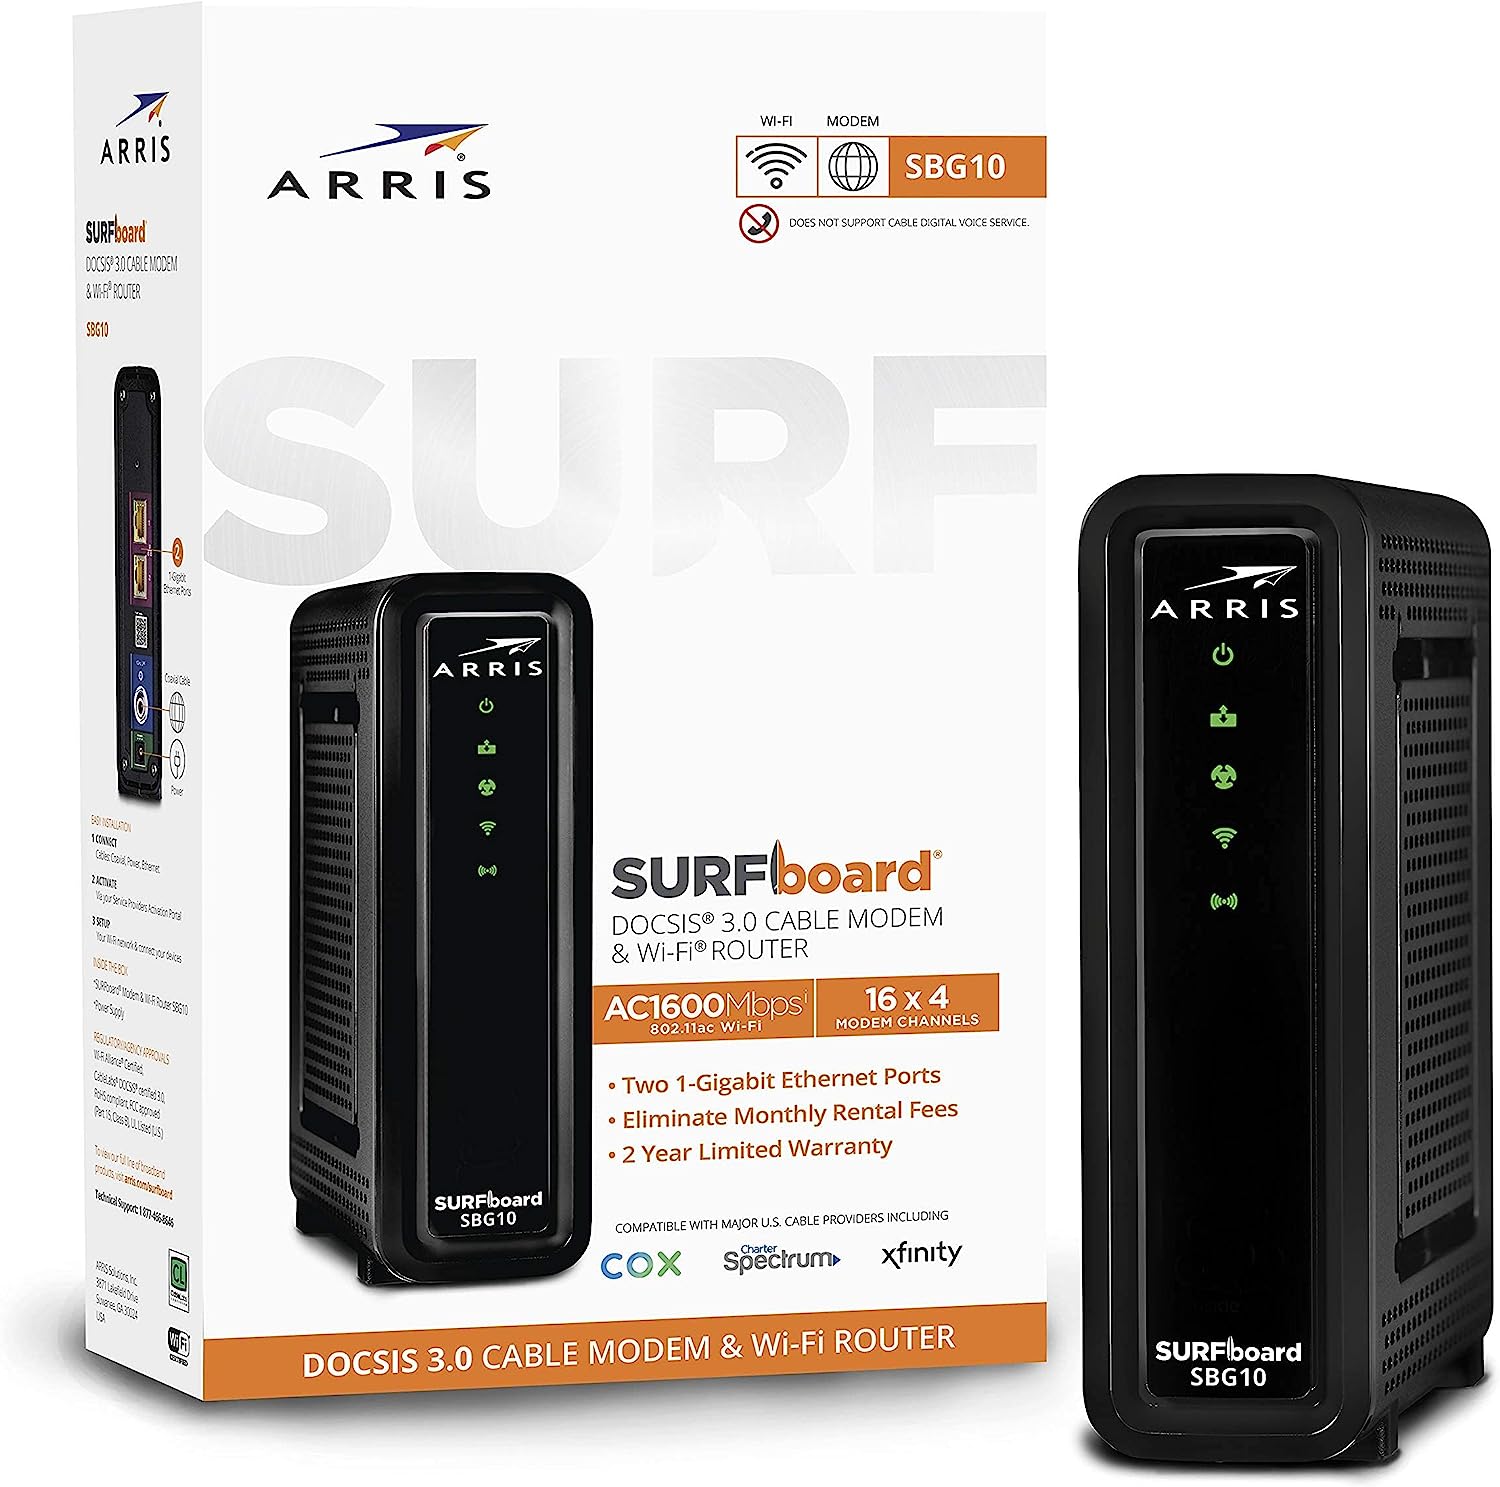 arris surfboard ac1600 dual band router with 16x4 [...]